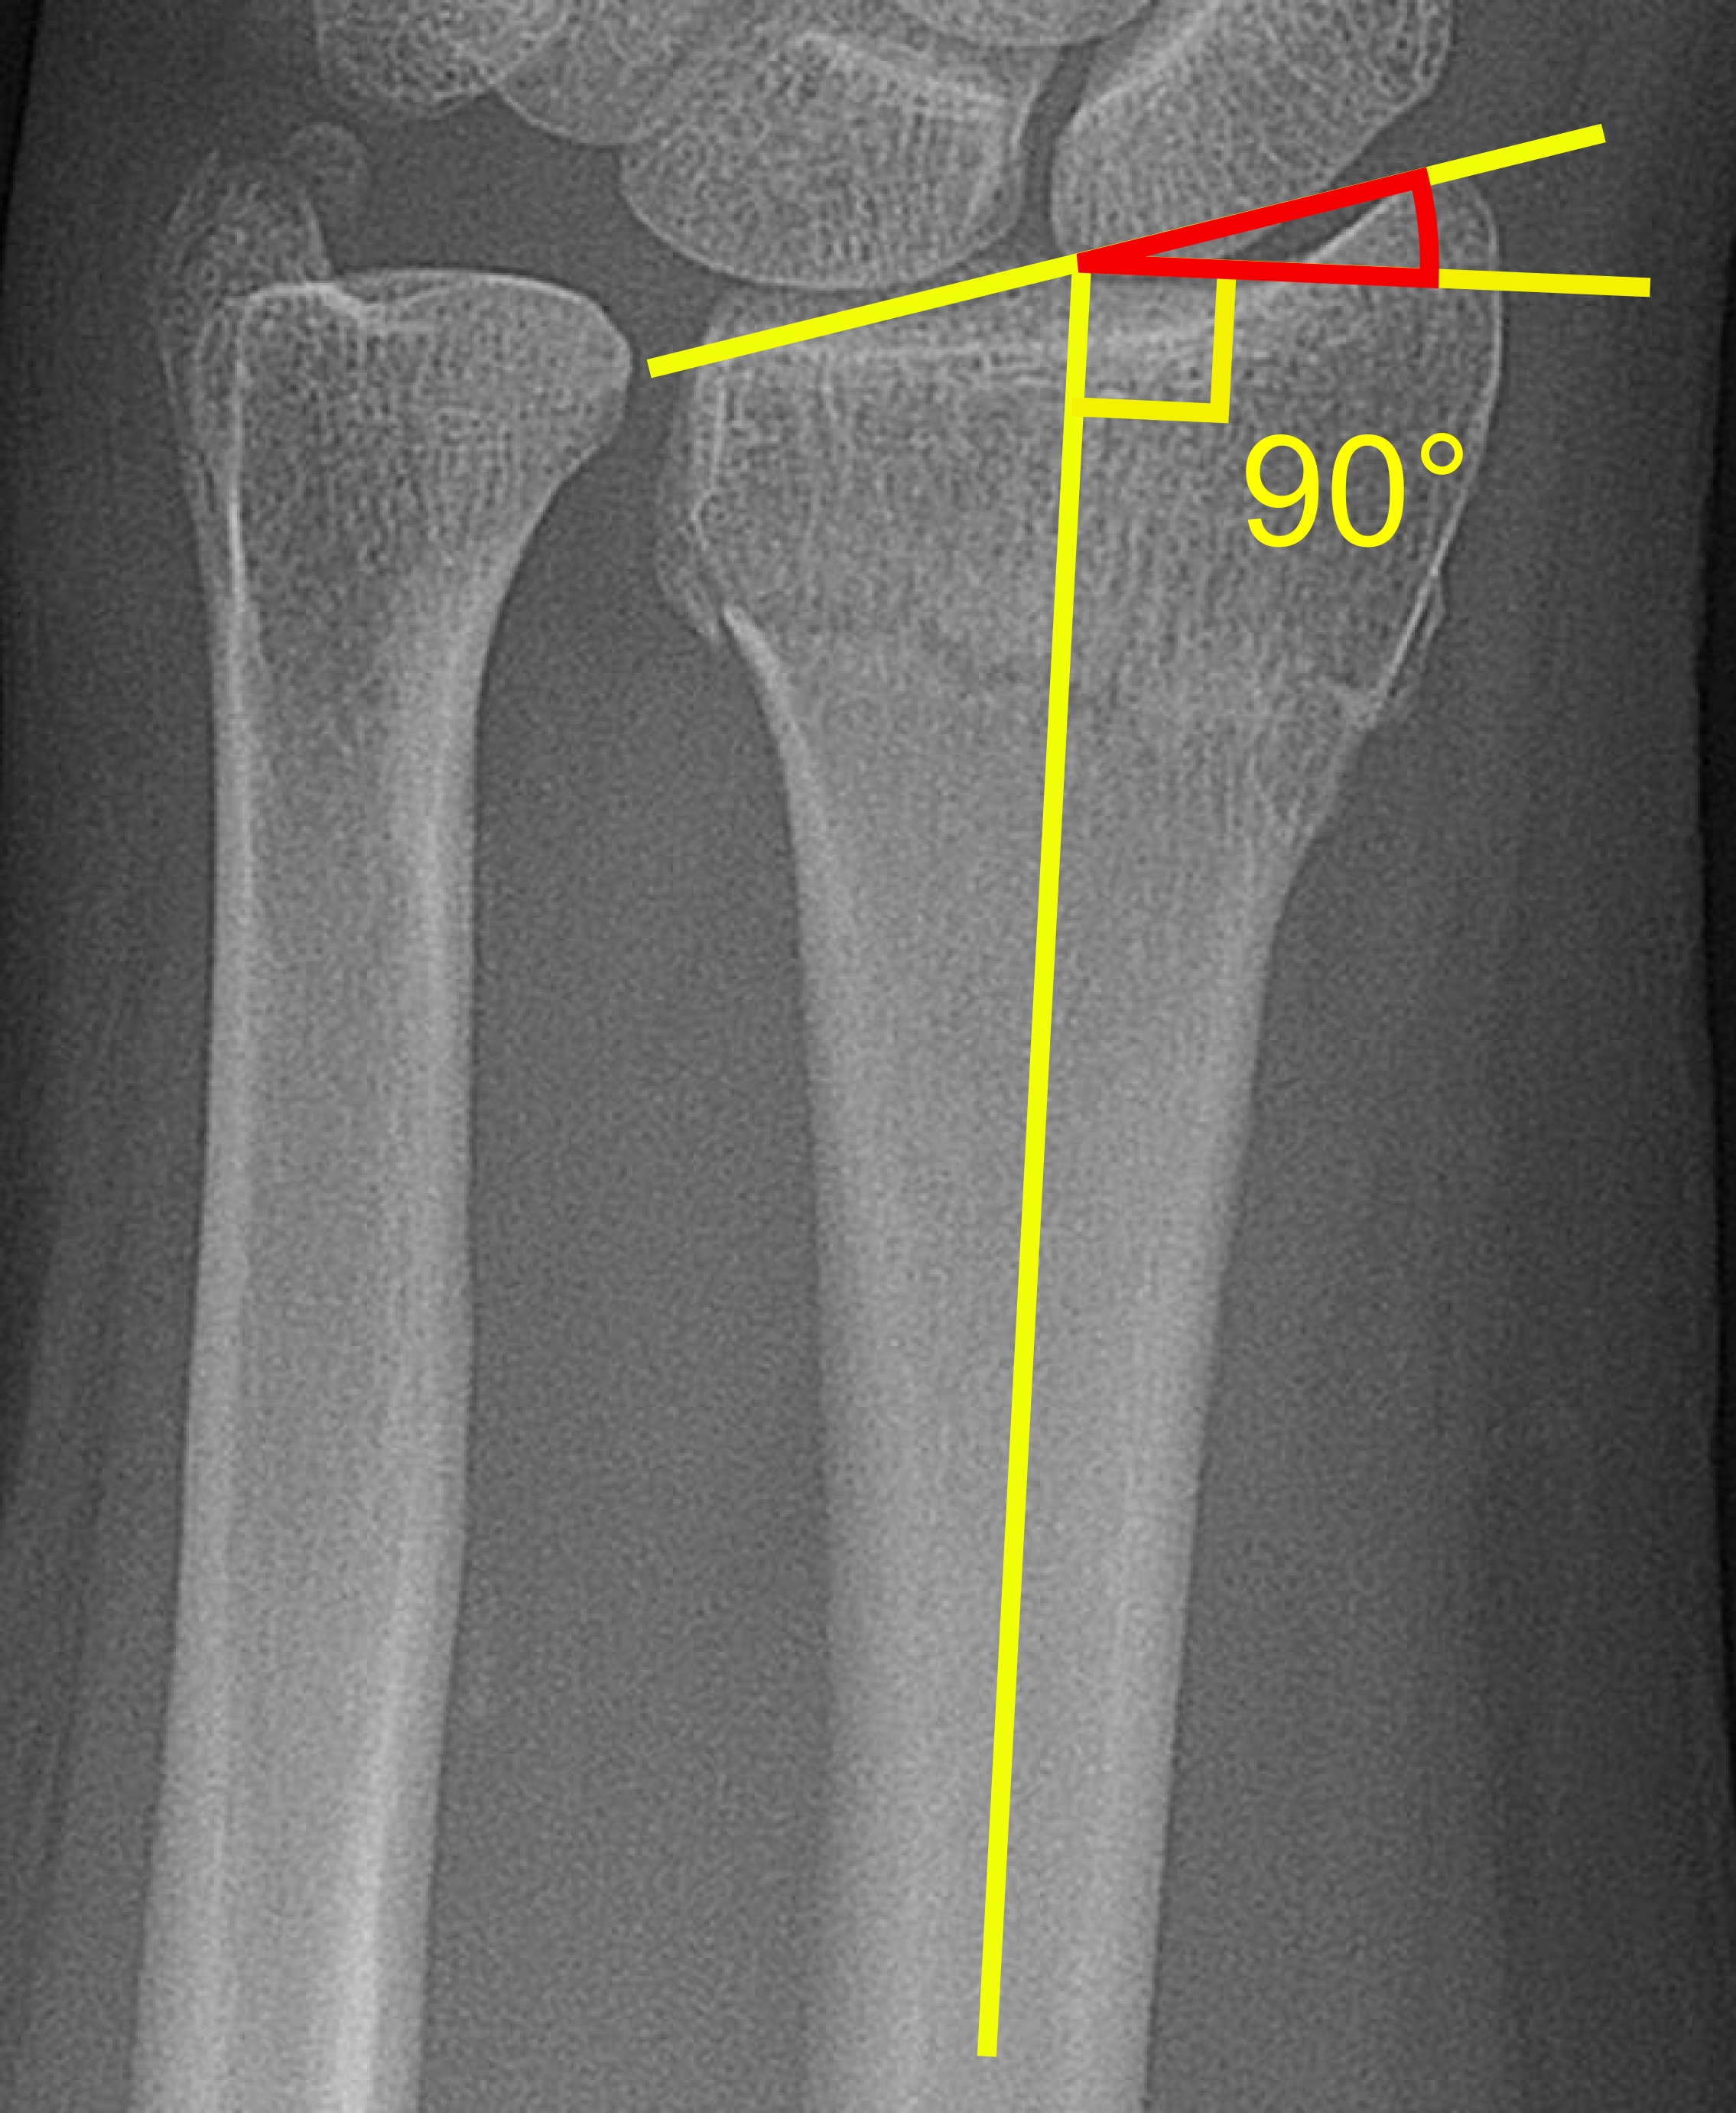 File:Radial inclination of distal radius fracture.jpg